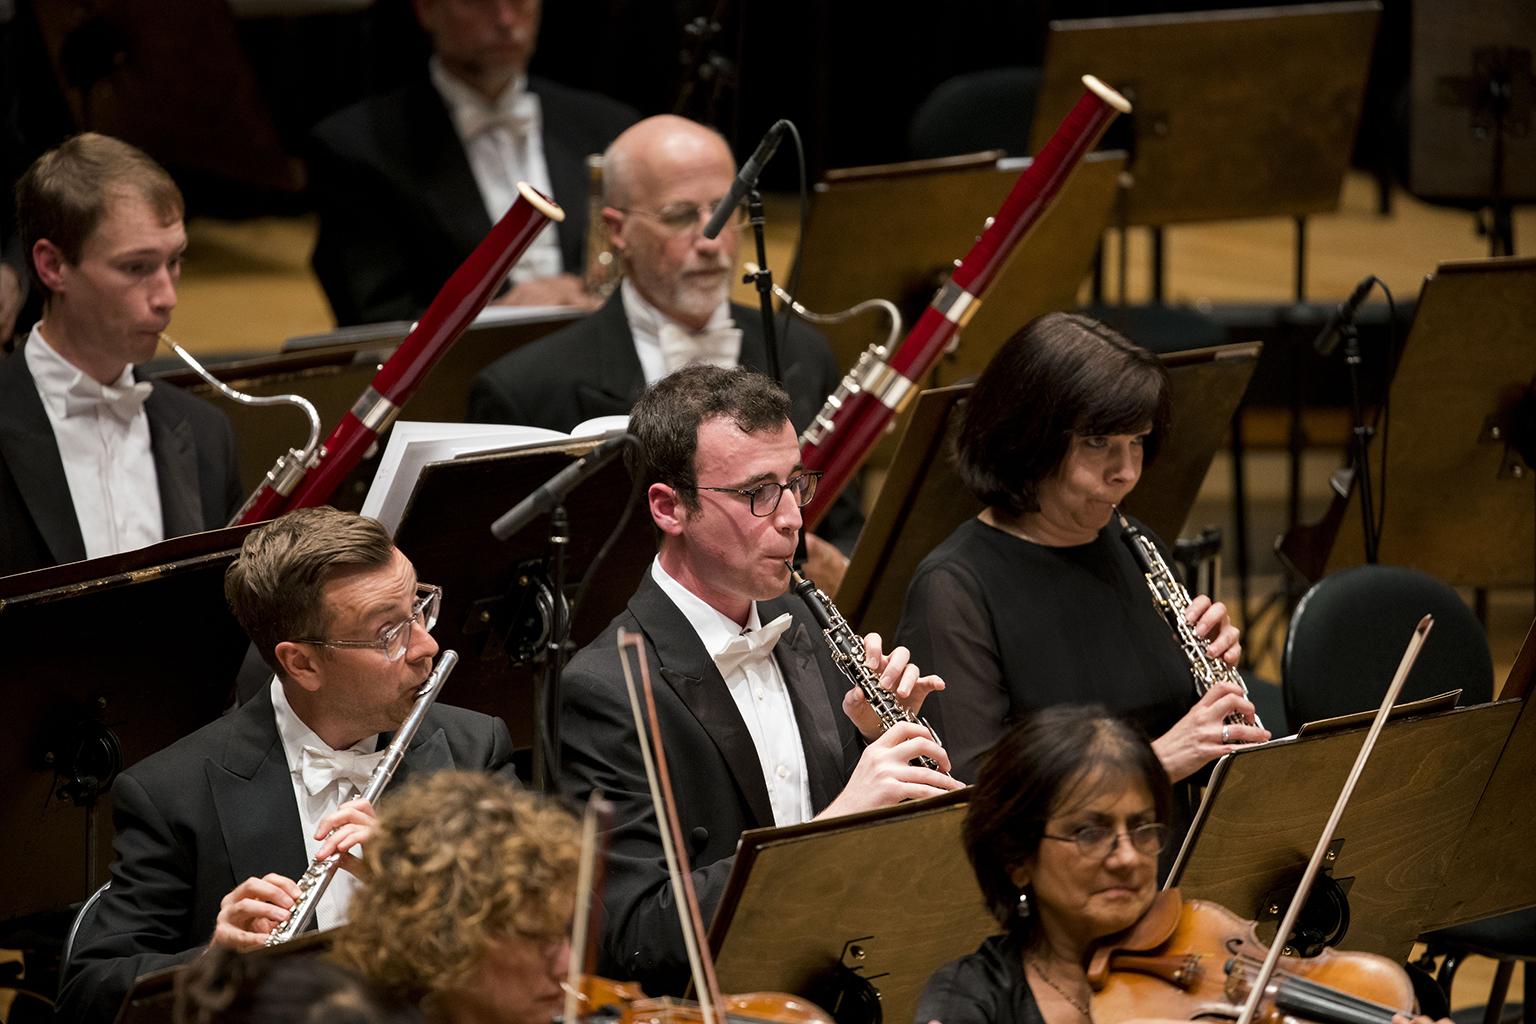 From left: Principal Flute Stefán Ragnar Höskuldsson, new Principal Oboe William Welter and CSO oboist Lora Schaefer join their fellow musicians in the CSO’s first performances of Prokofiev’s “Sinfonietta.” (Photo credit: Todd Rosenberg)